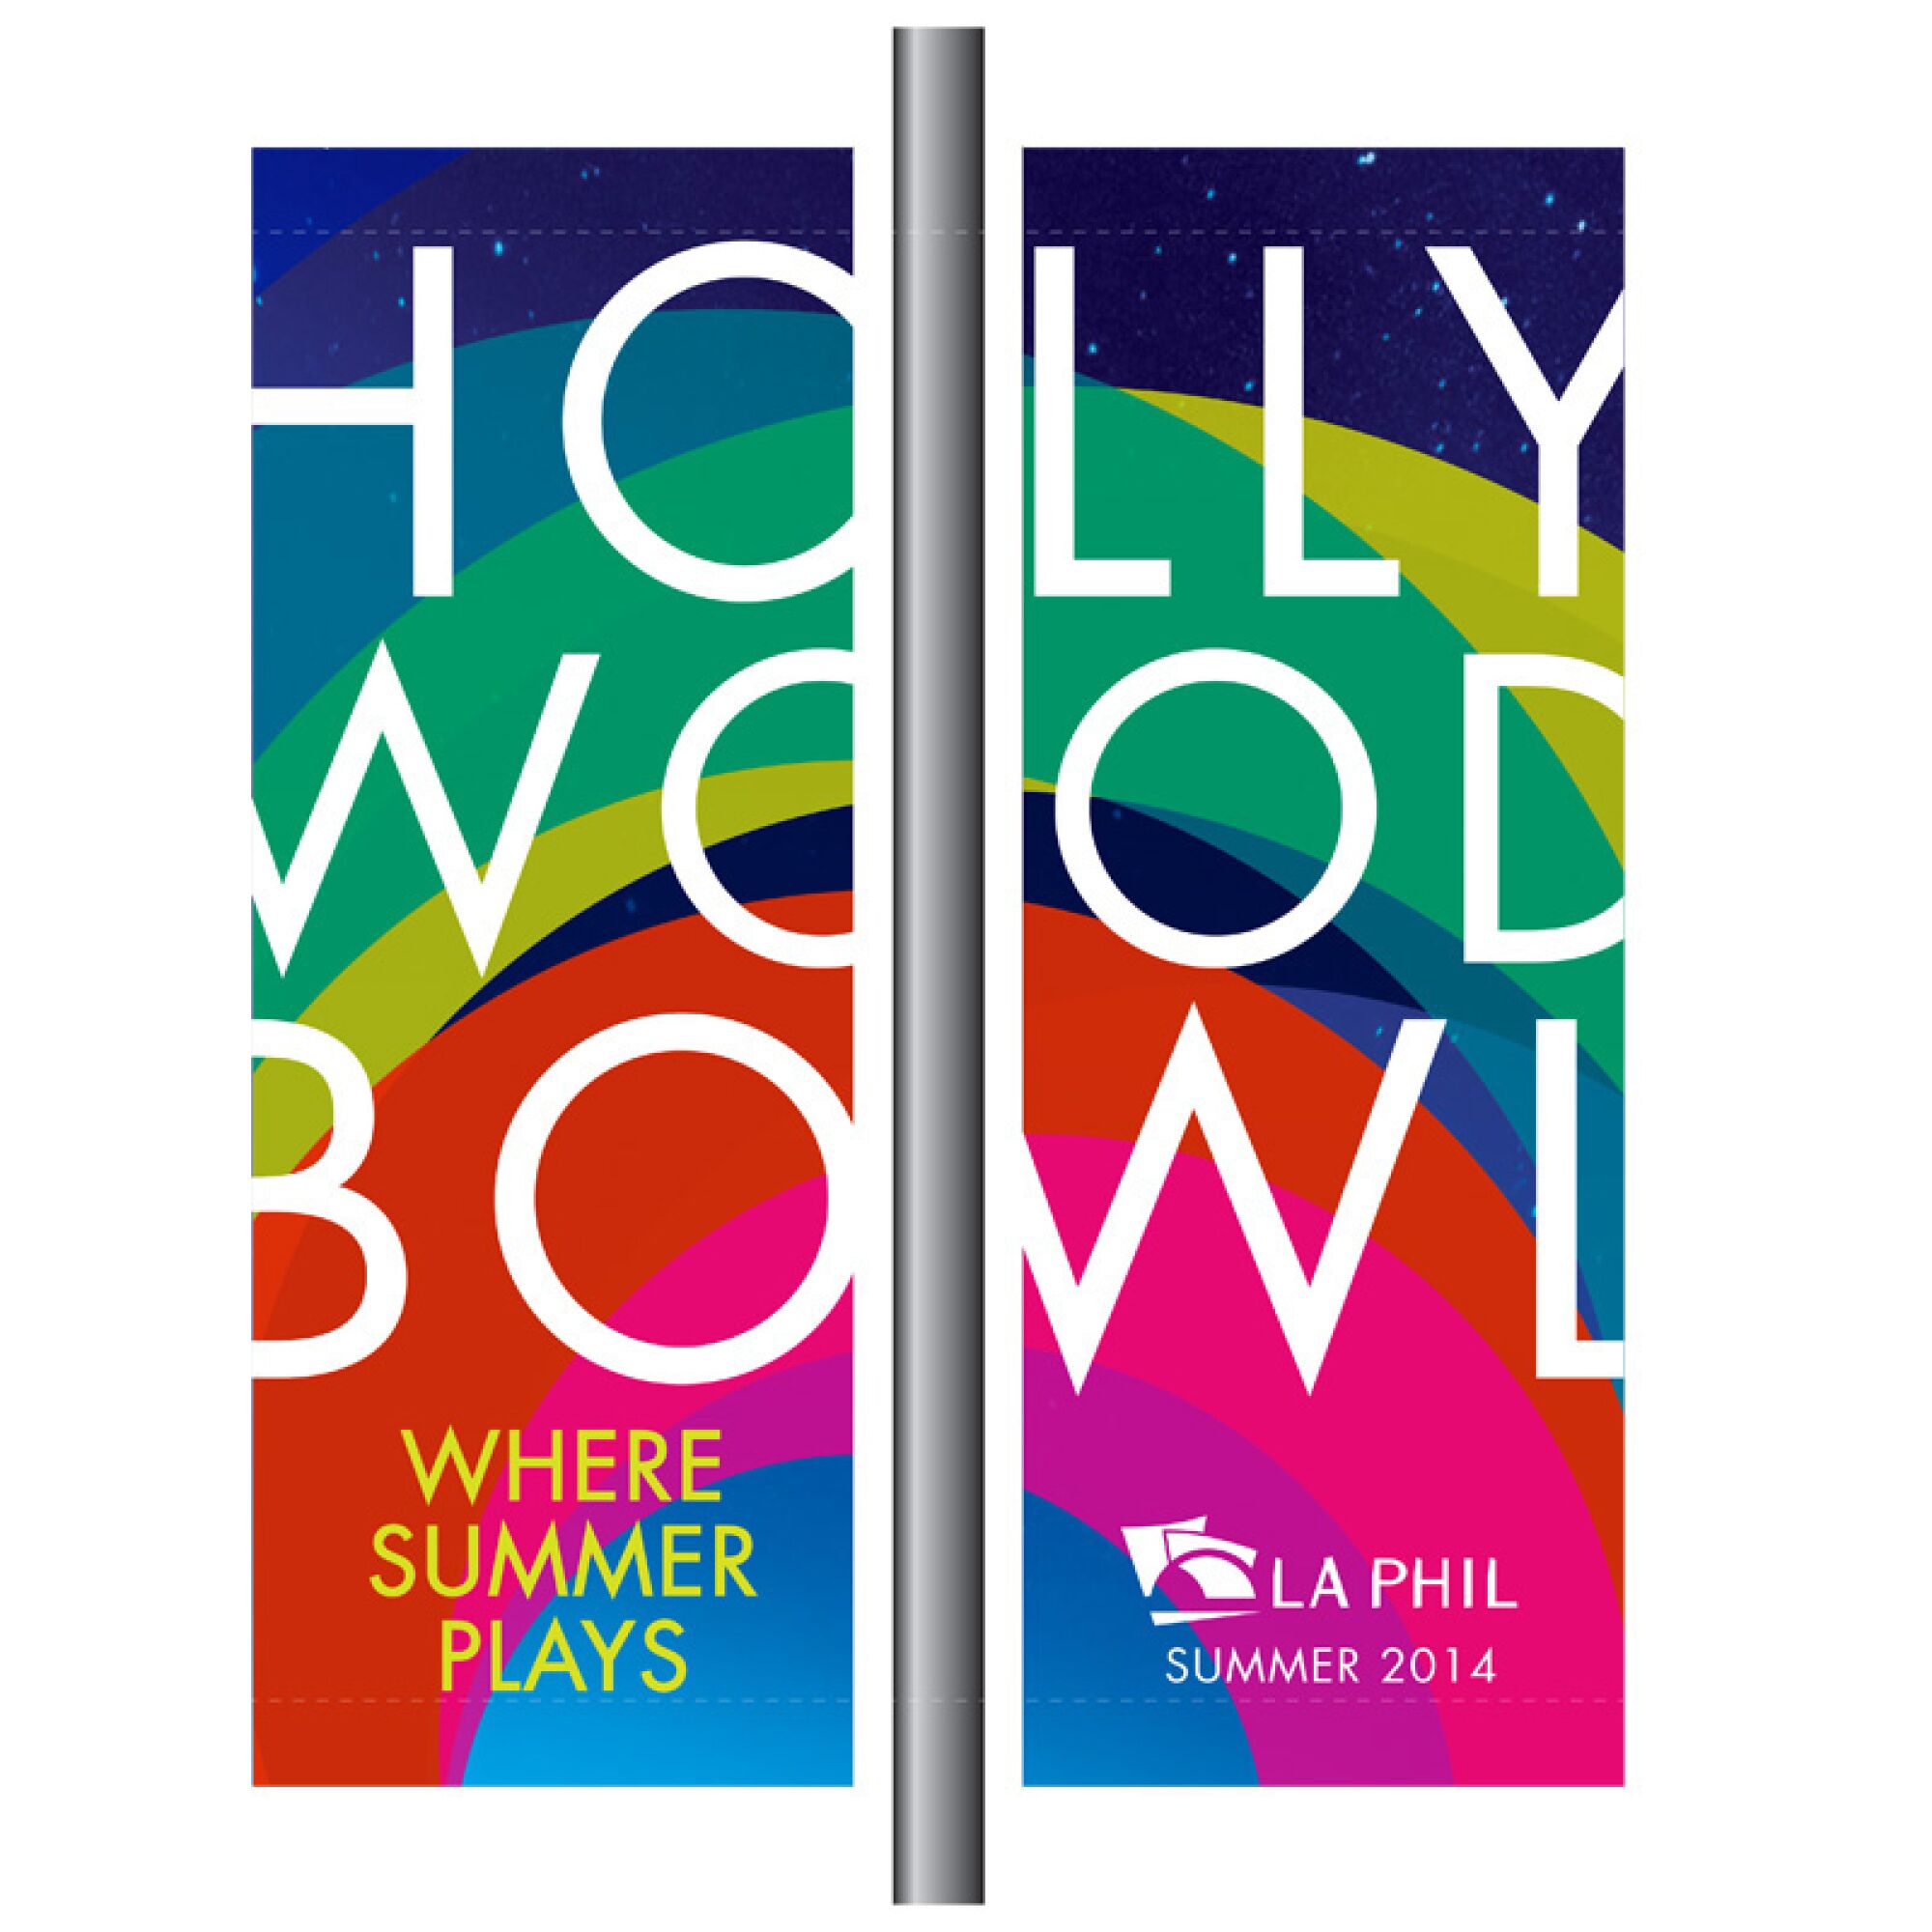 Street banners that say "Hollywood Bowl, where summer plays" on a colorful background.